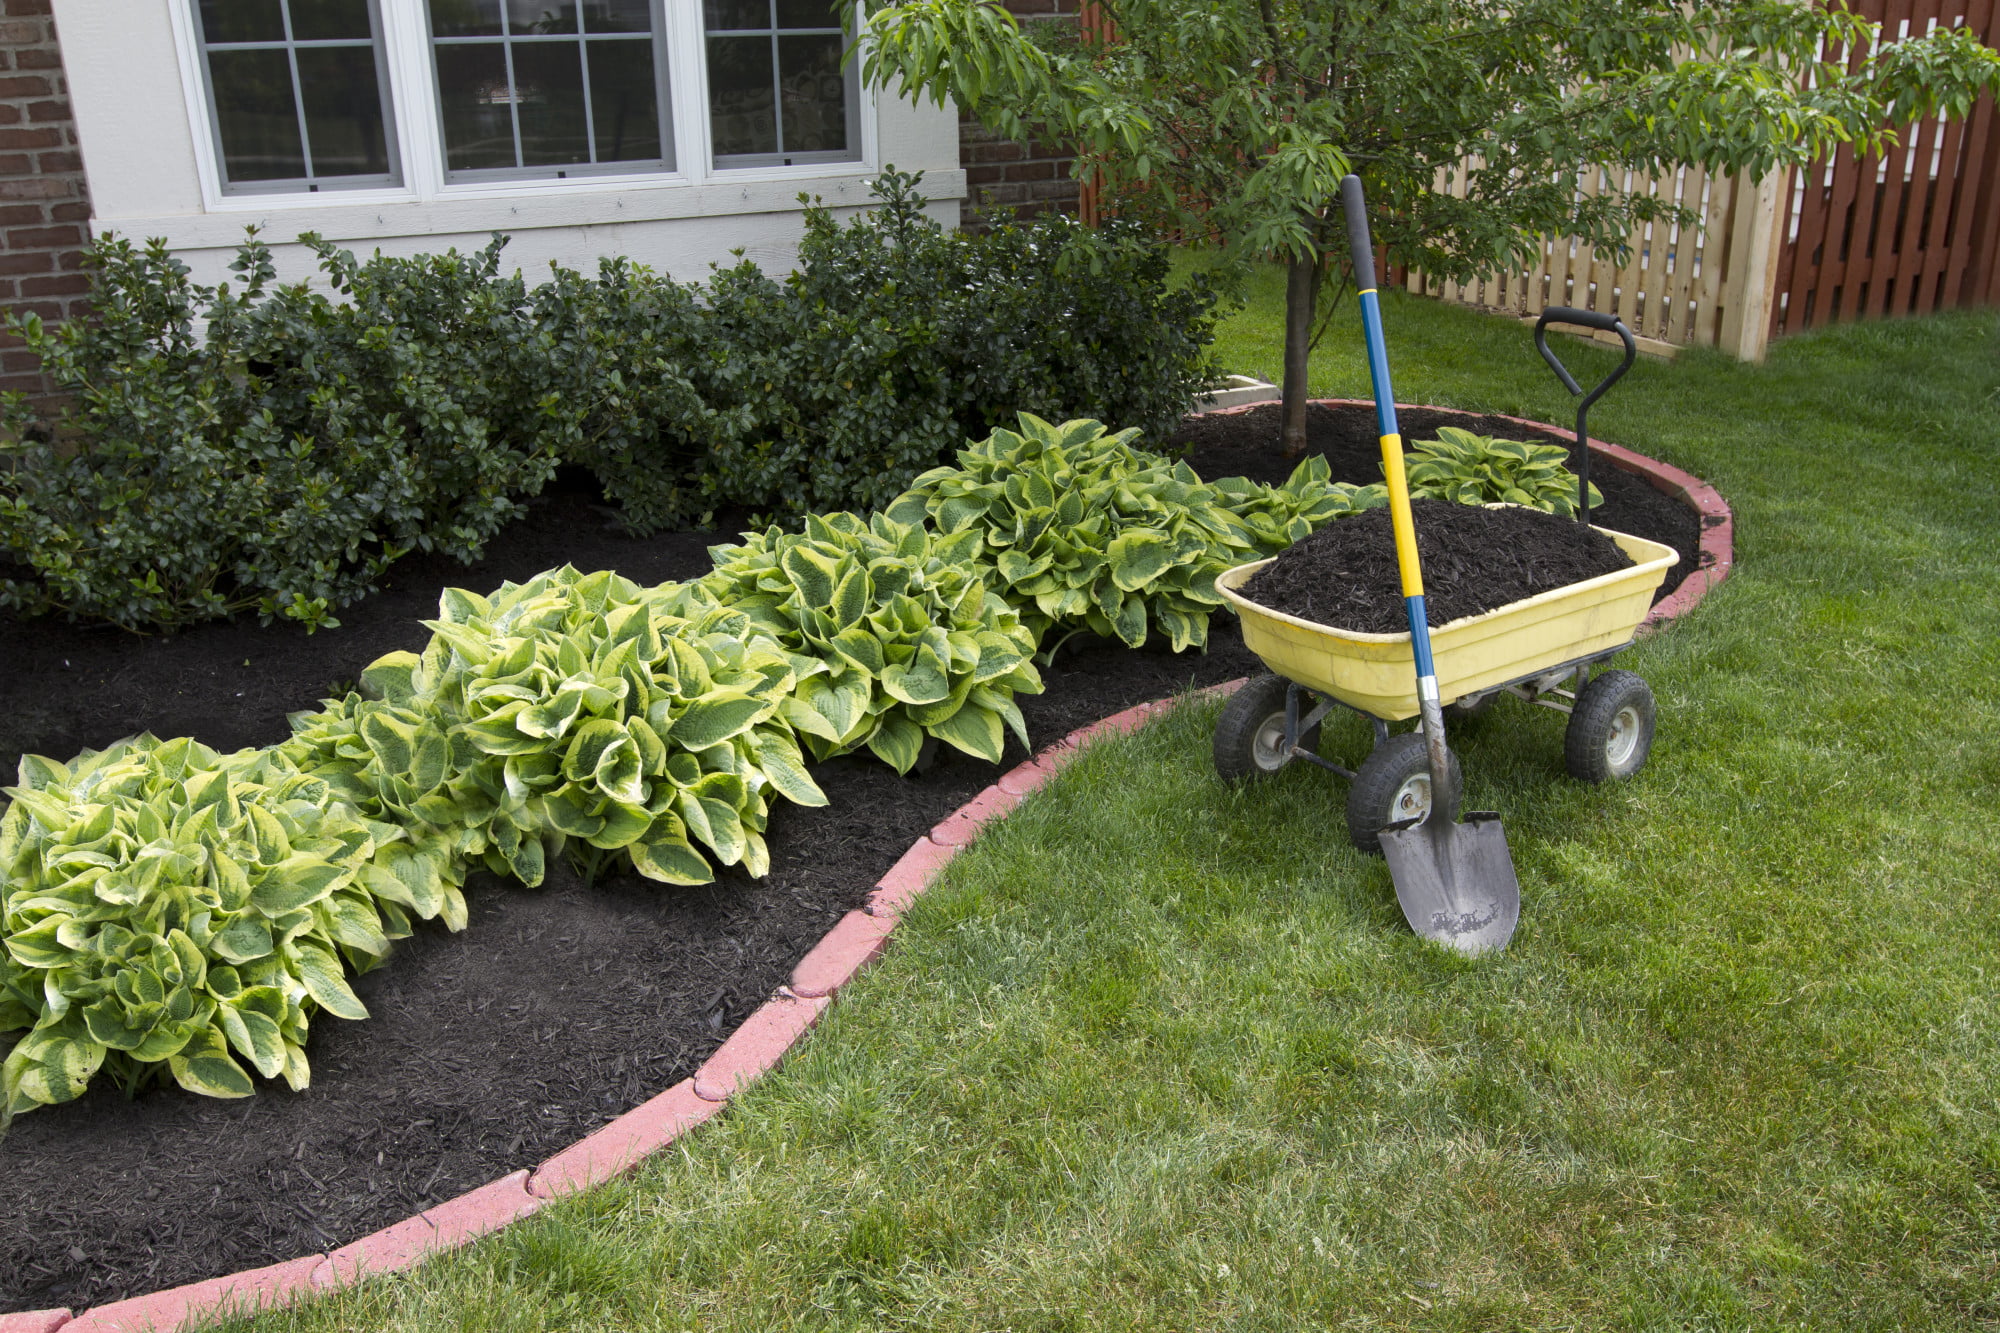 Are you looking to redo your home's landscaping? Click here for a complete beginner's guide to landscape renovation to give you some great ideas.